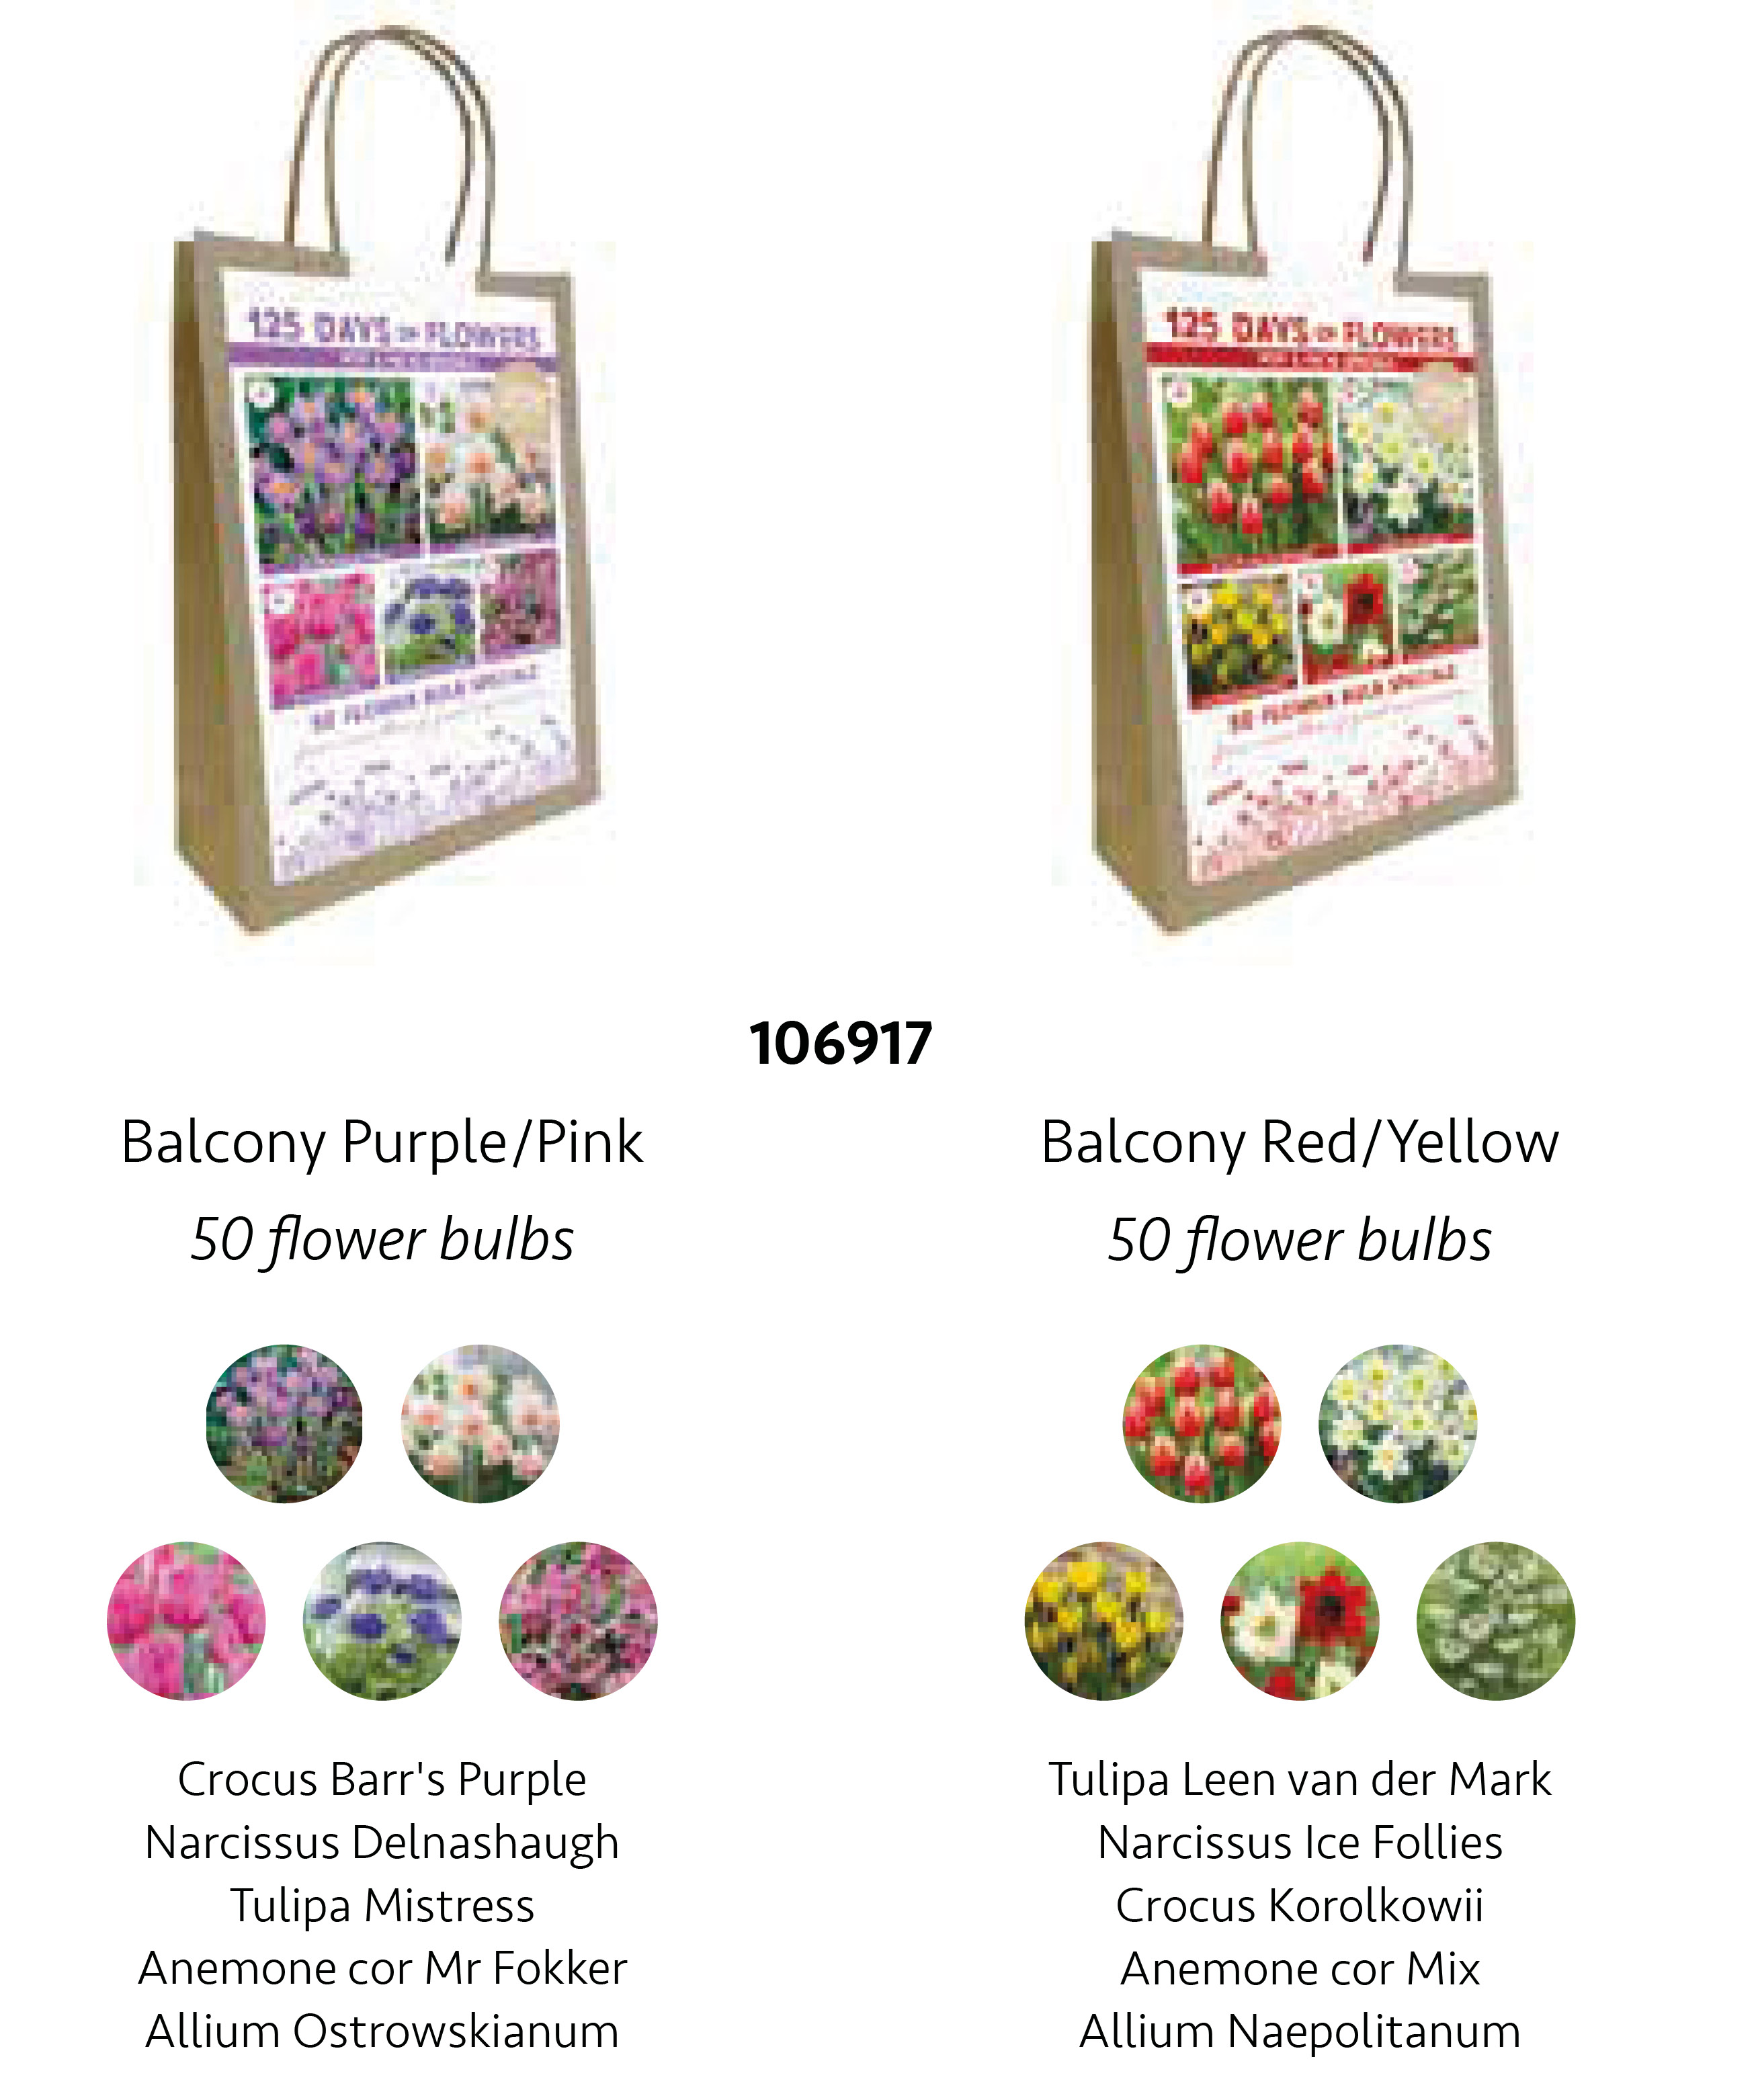 48 SACHETS 125 DAYS OF FLOWERS